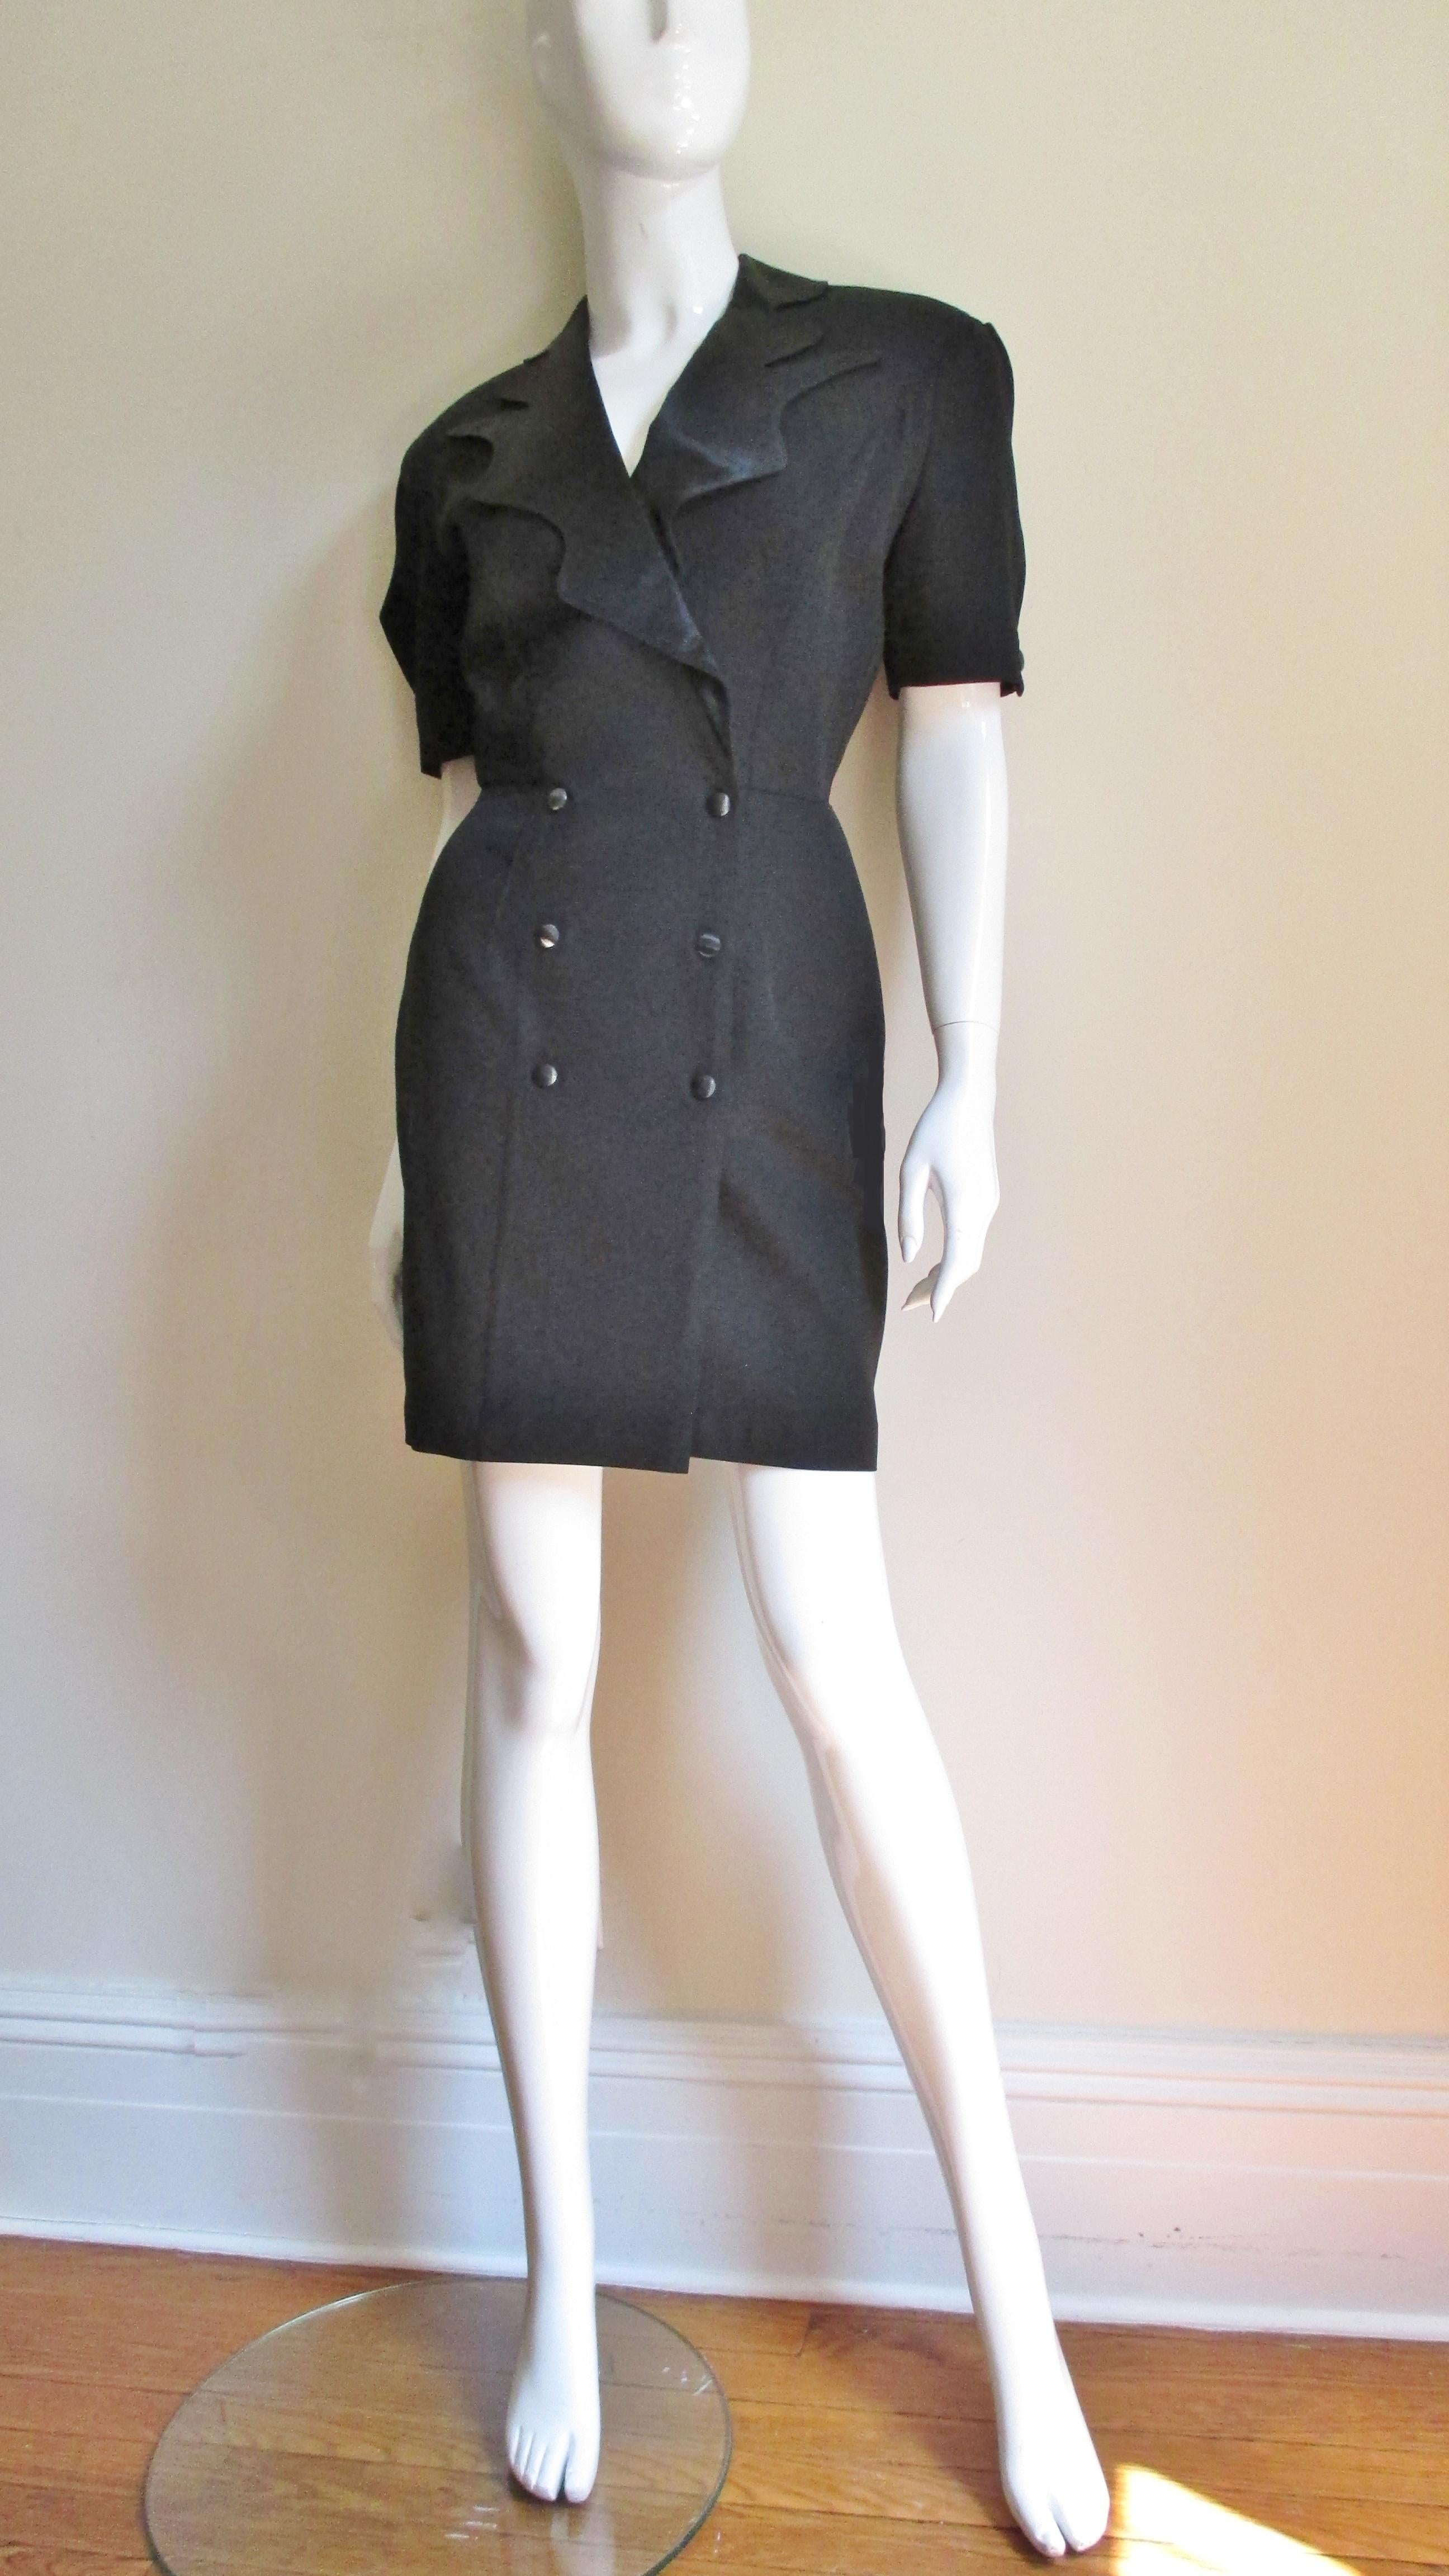 Thierry Mugler Backless Dress 1990s In Good Condition For Sale In Water Mill, NY